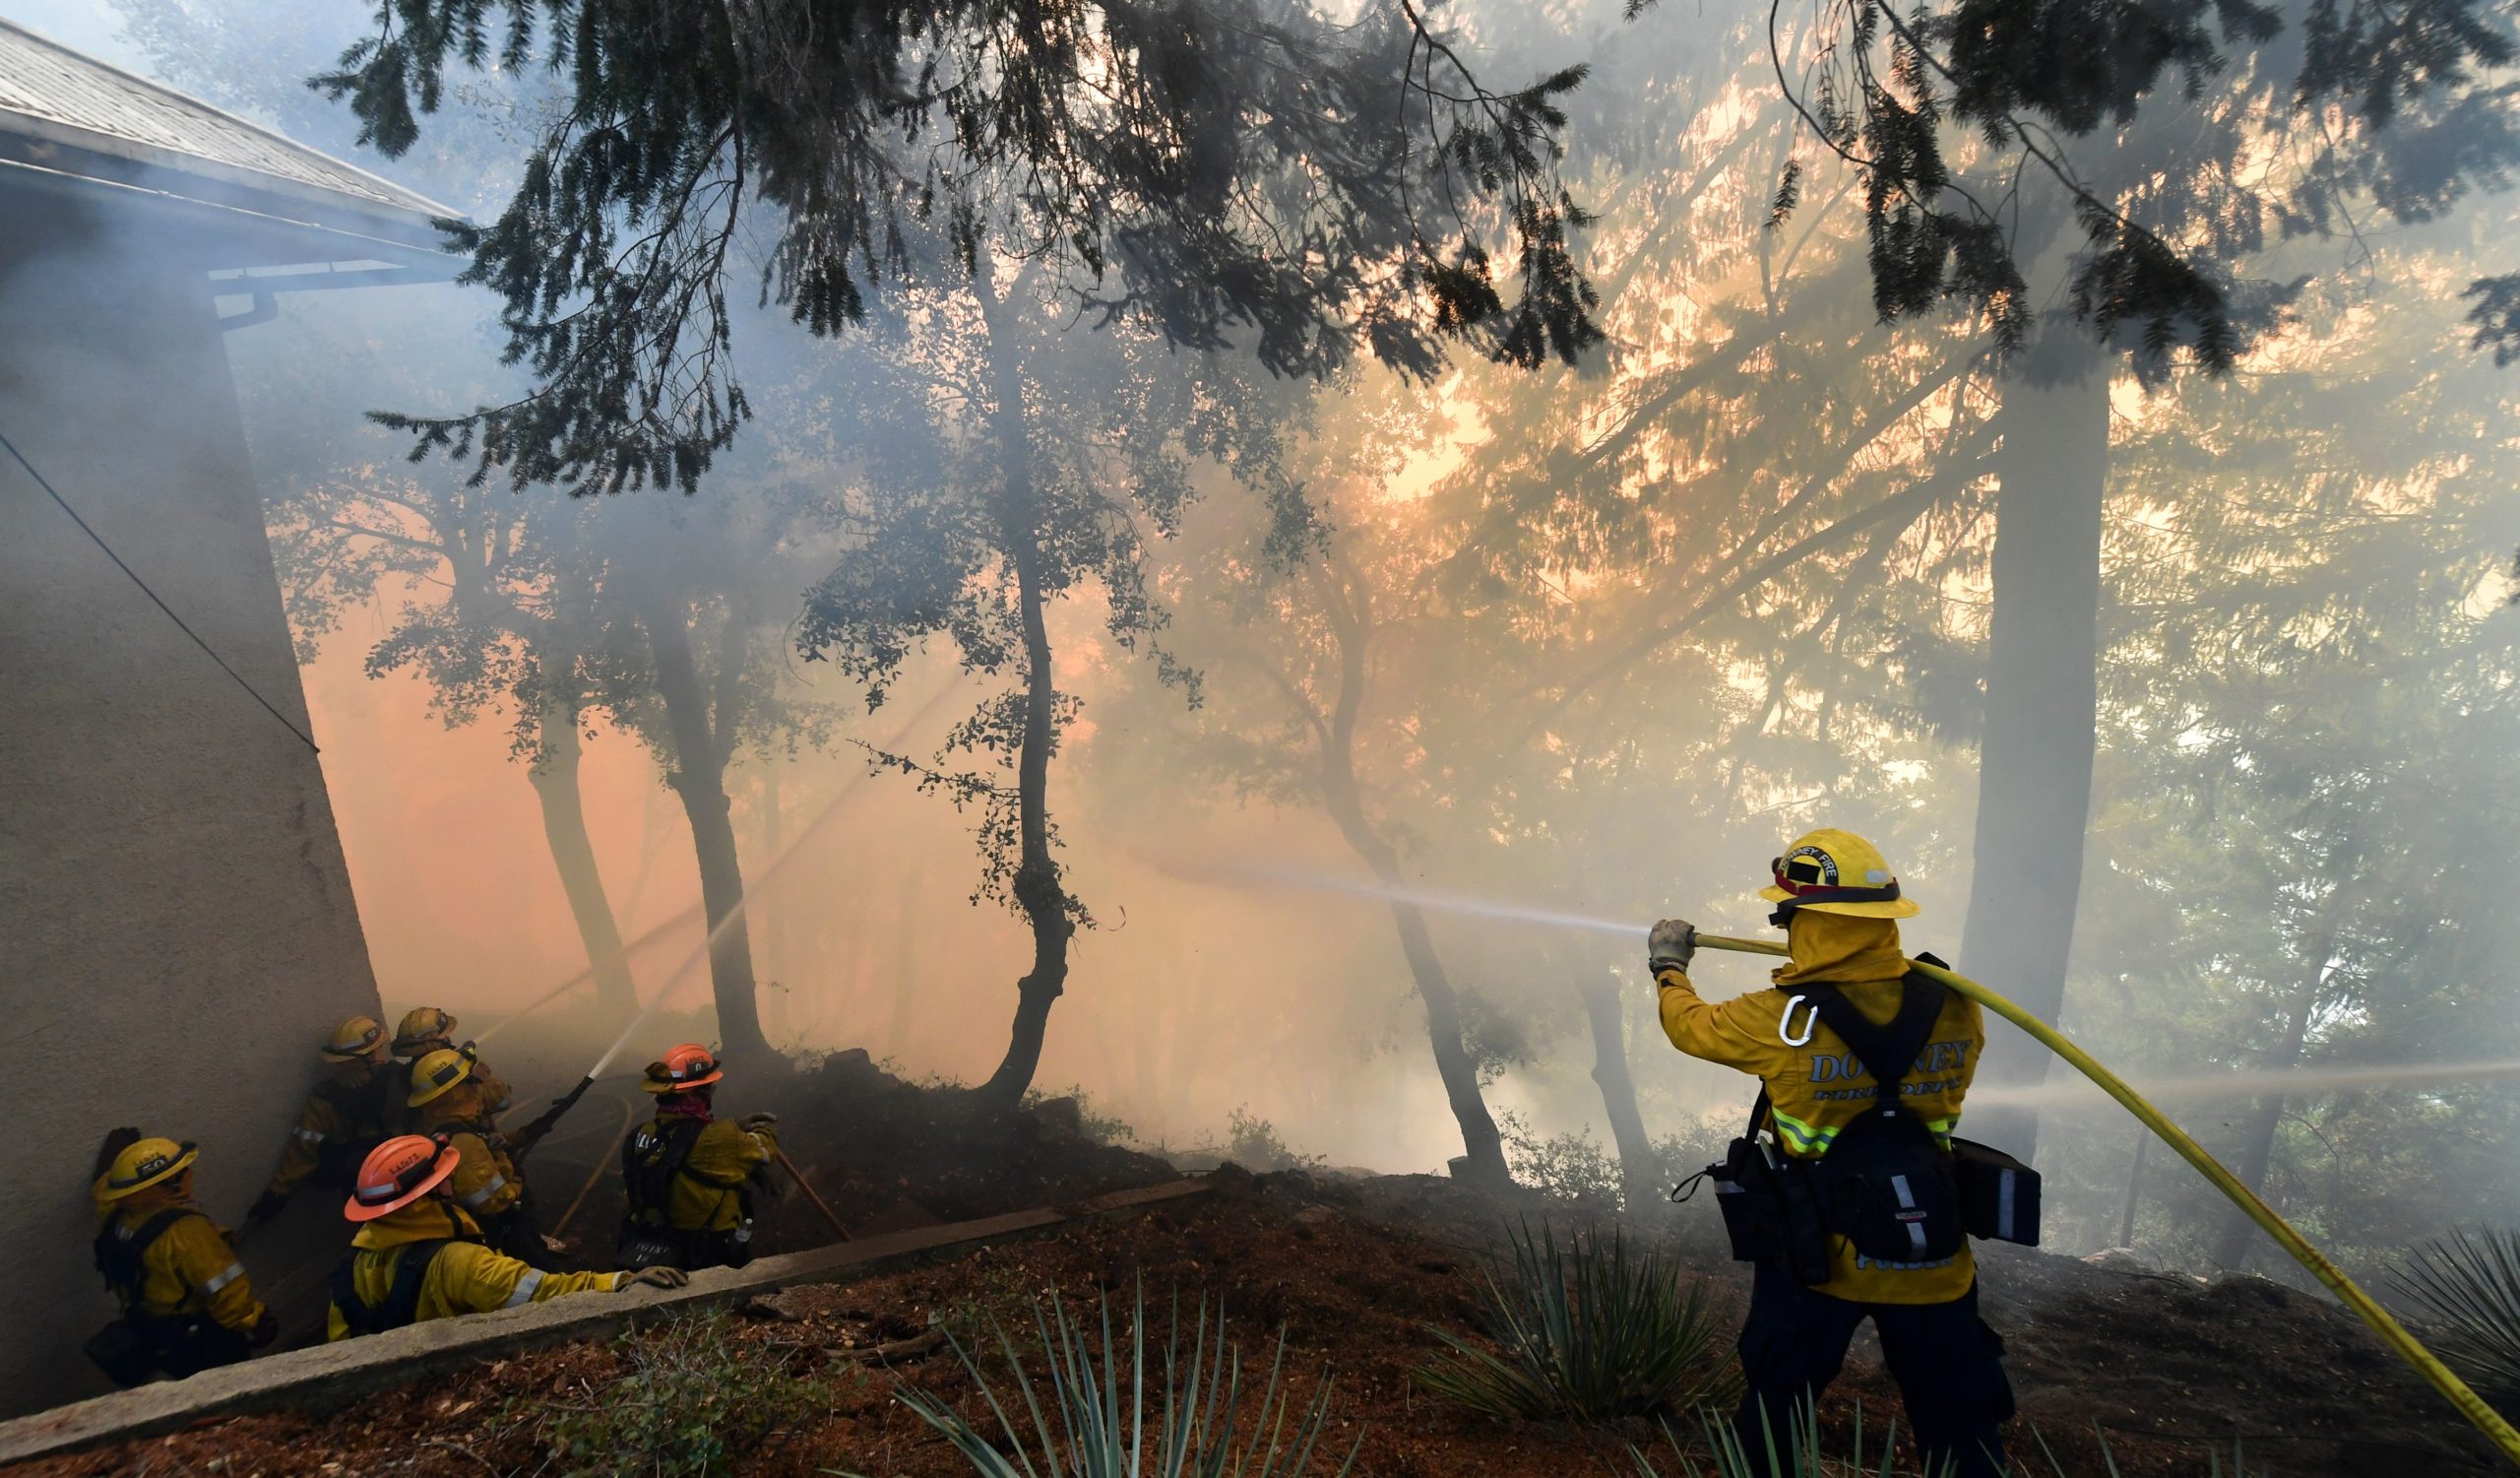 Firefighters work to protect a building at Mt. Wilson Observatory as the Bobcat Fire burns in the Angeles National Forest, northeast of Los Angeles, California on September 17, 2020. - The Bobcat Fire erupted on September 6 near the Cogswell Dam and West Fork Day Use area northeast of Mount Wilson within the Angeles National Forest, expanding from 46,263 acres to 50,539 acres since September 16 while remaining only 3% contained. (Photo by Frederic J. Brown/AFP via Getty Images)